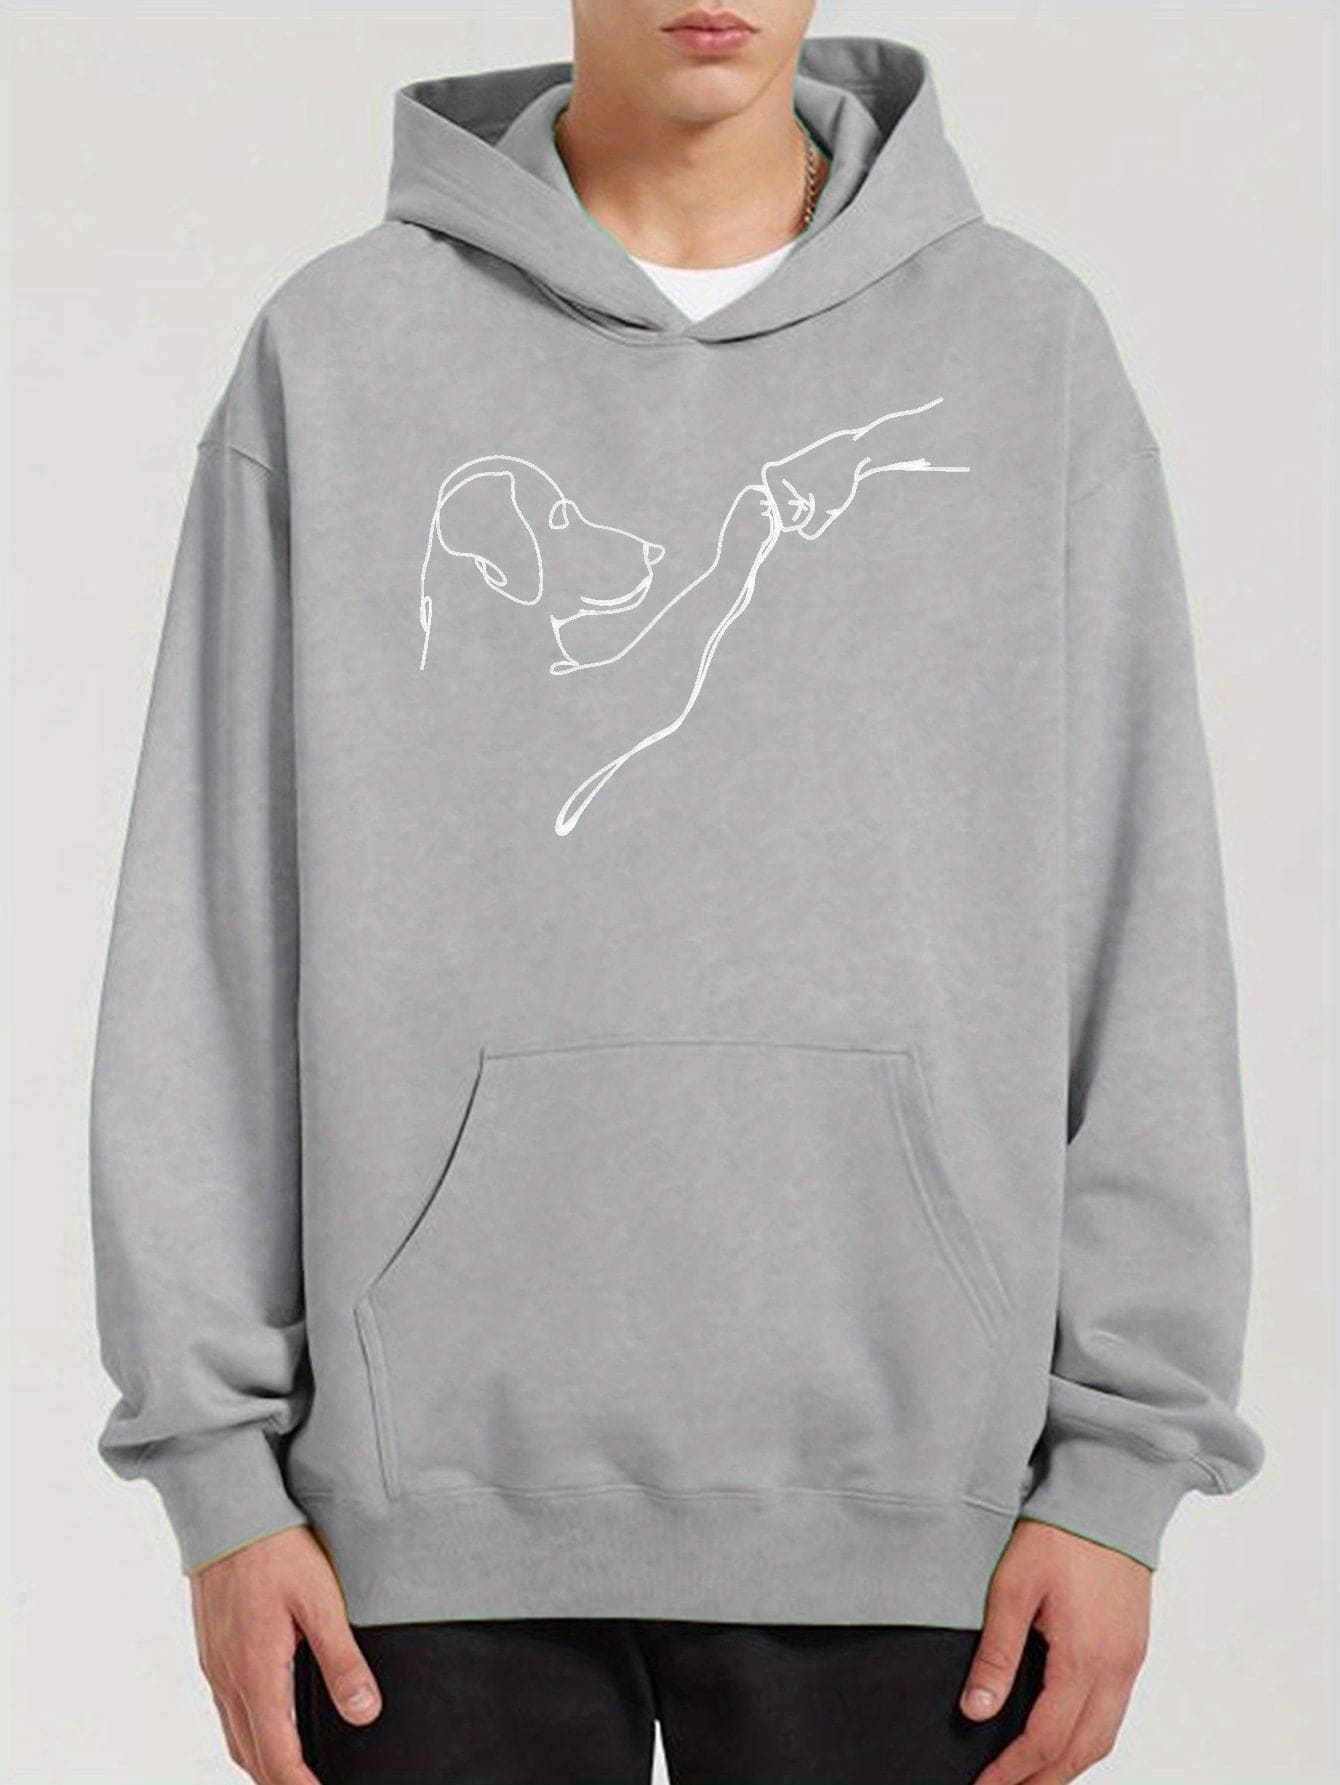 Dog & Human - Speciale Band Hoodie